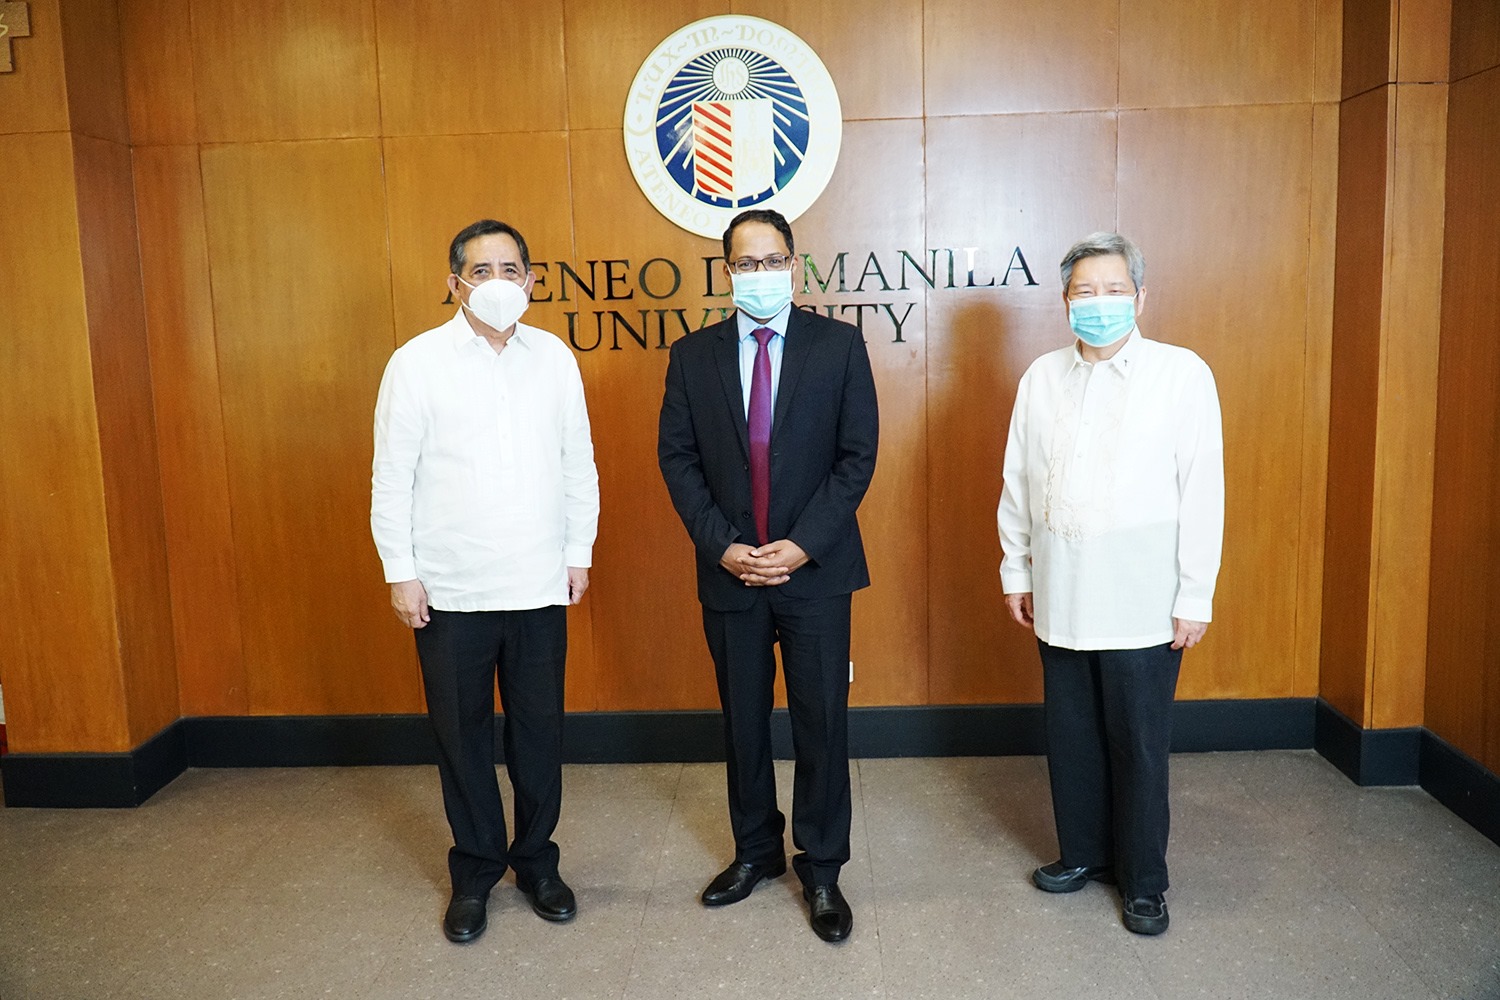 Indian envoy to PH, Ateneo president discuss climate, COVID, and closer ties